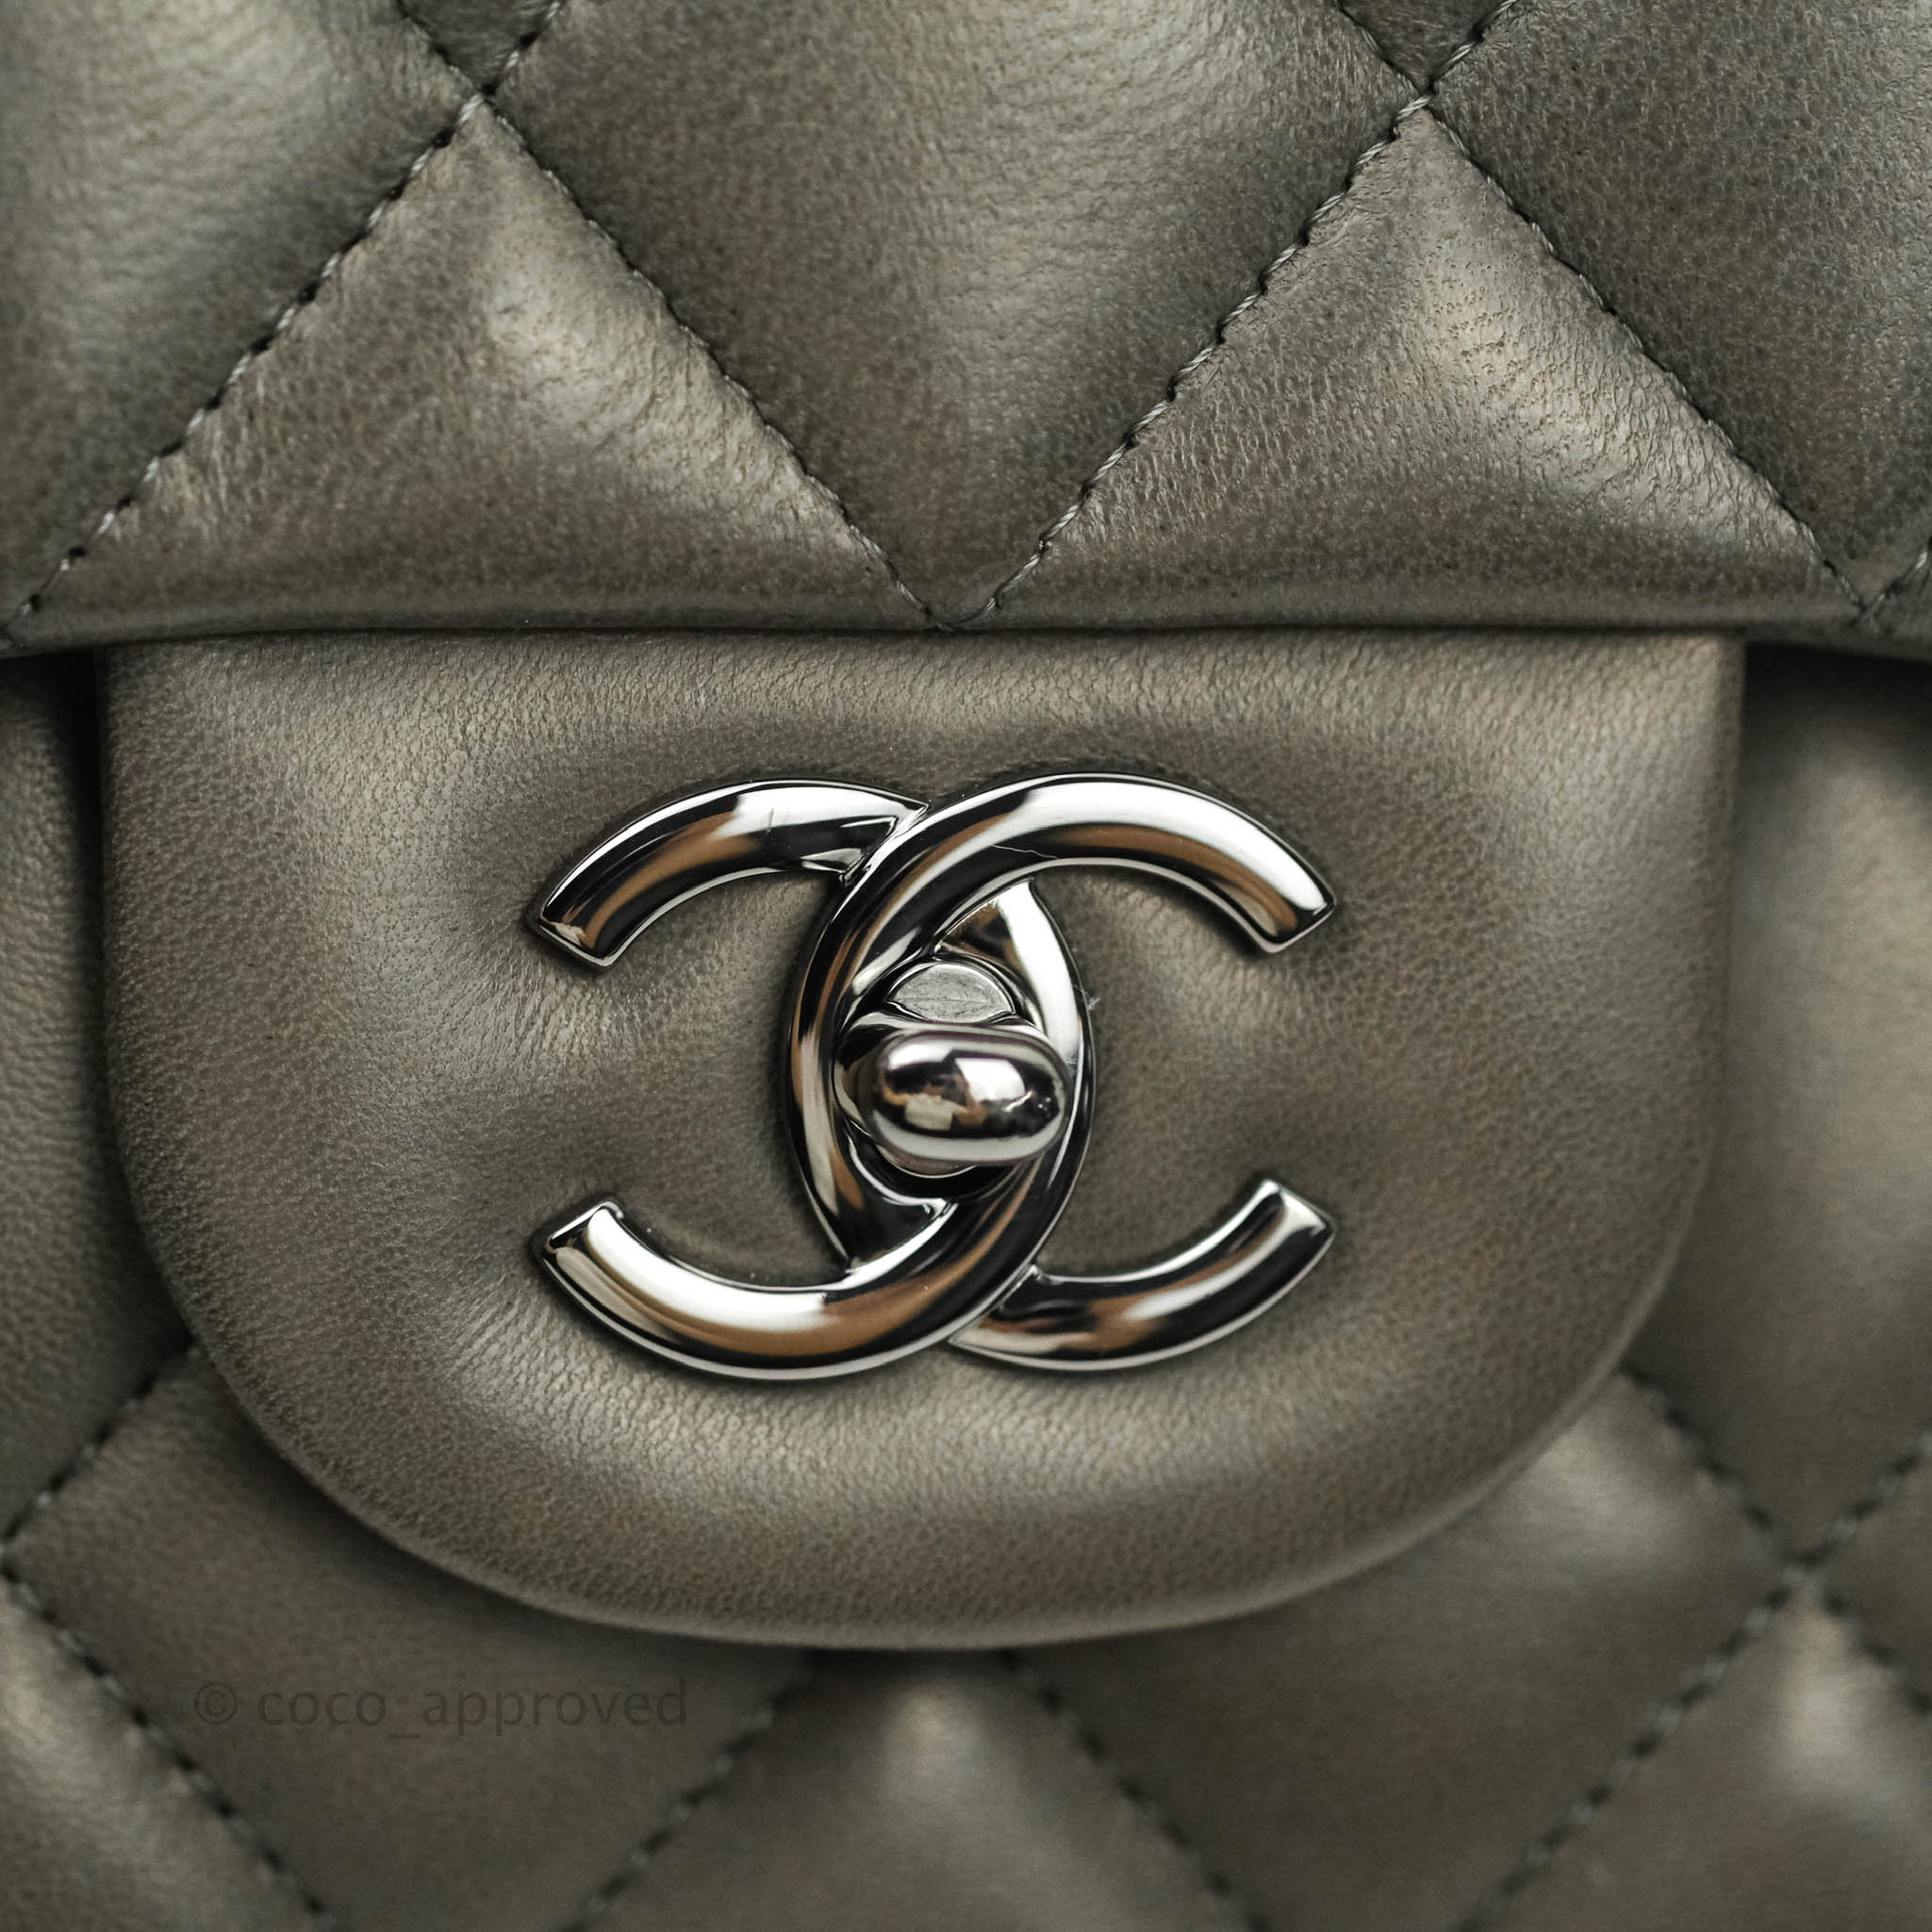 Chanel Quilted Lambskin Medium Double Flap Metallic with Gunmetal